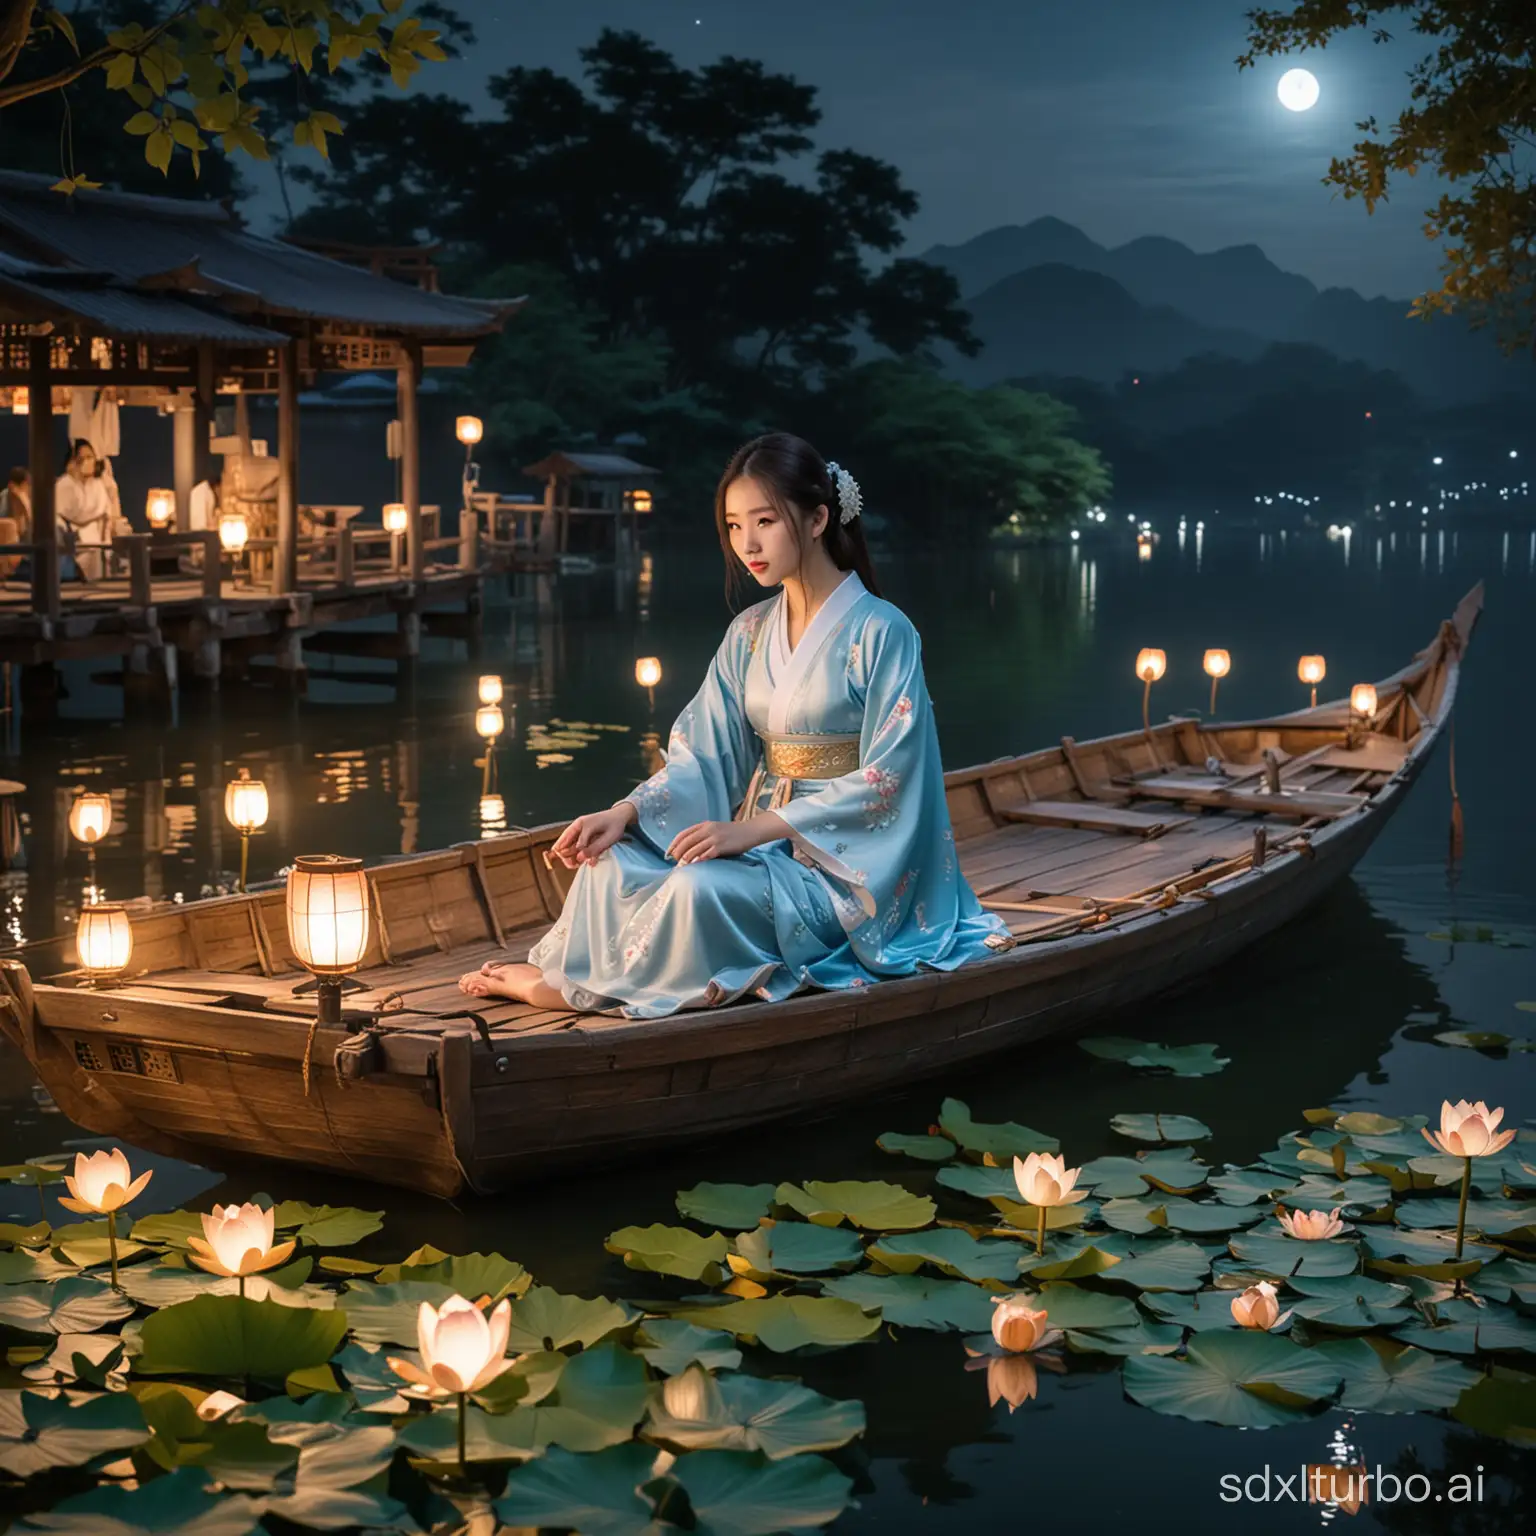 At night, a girl in light blue Hanfu sits on a fishing boat. There are lotus flowers, lotus leaves, and river lanterns around the fishing boat, and behind it is a wooden bridge spanning the entire scene. The girl's face is visible.